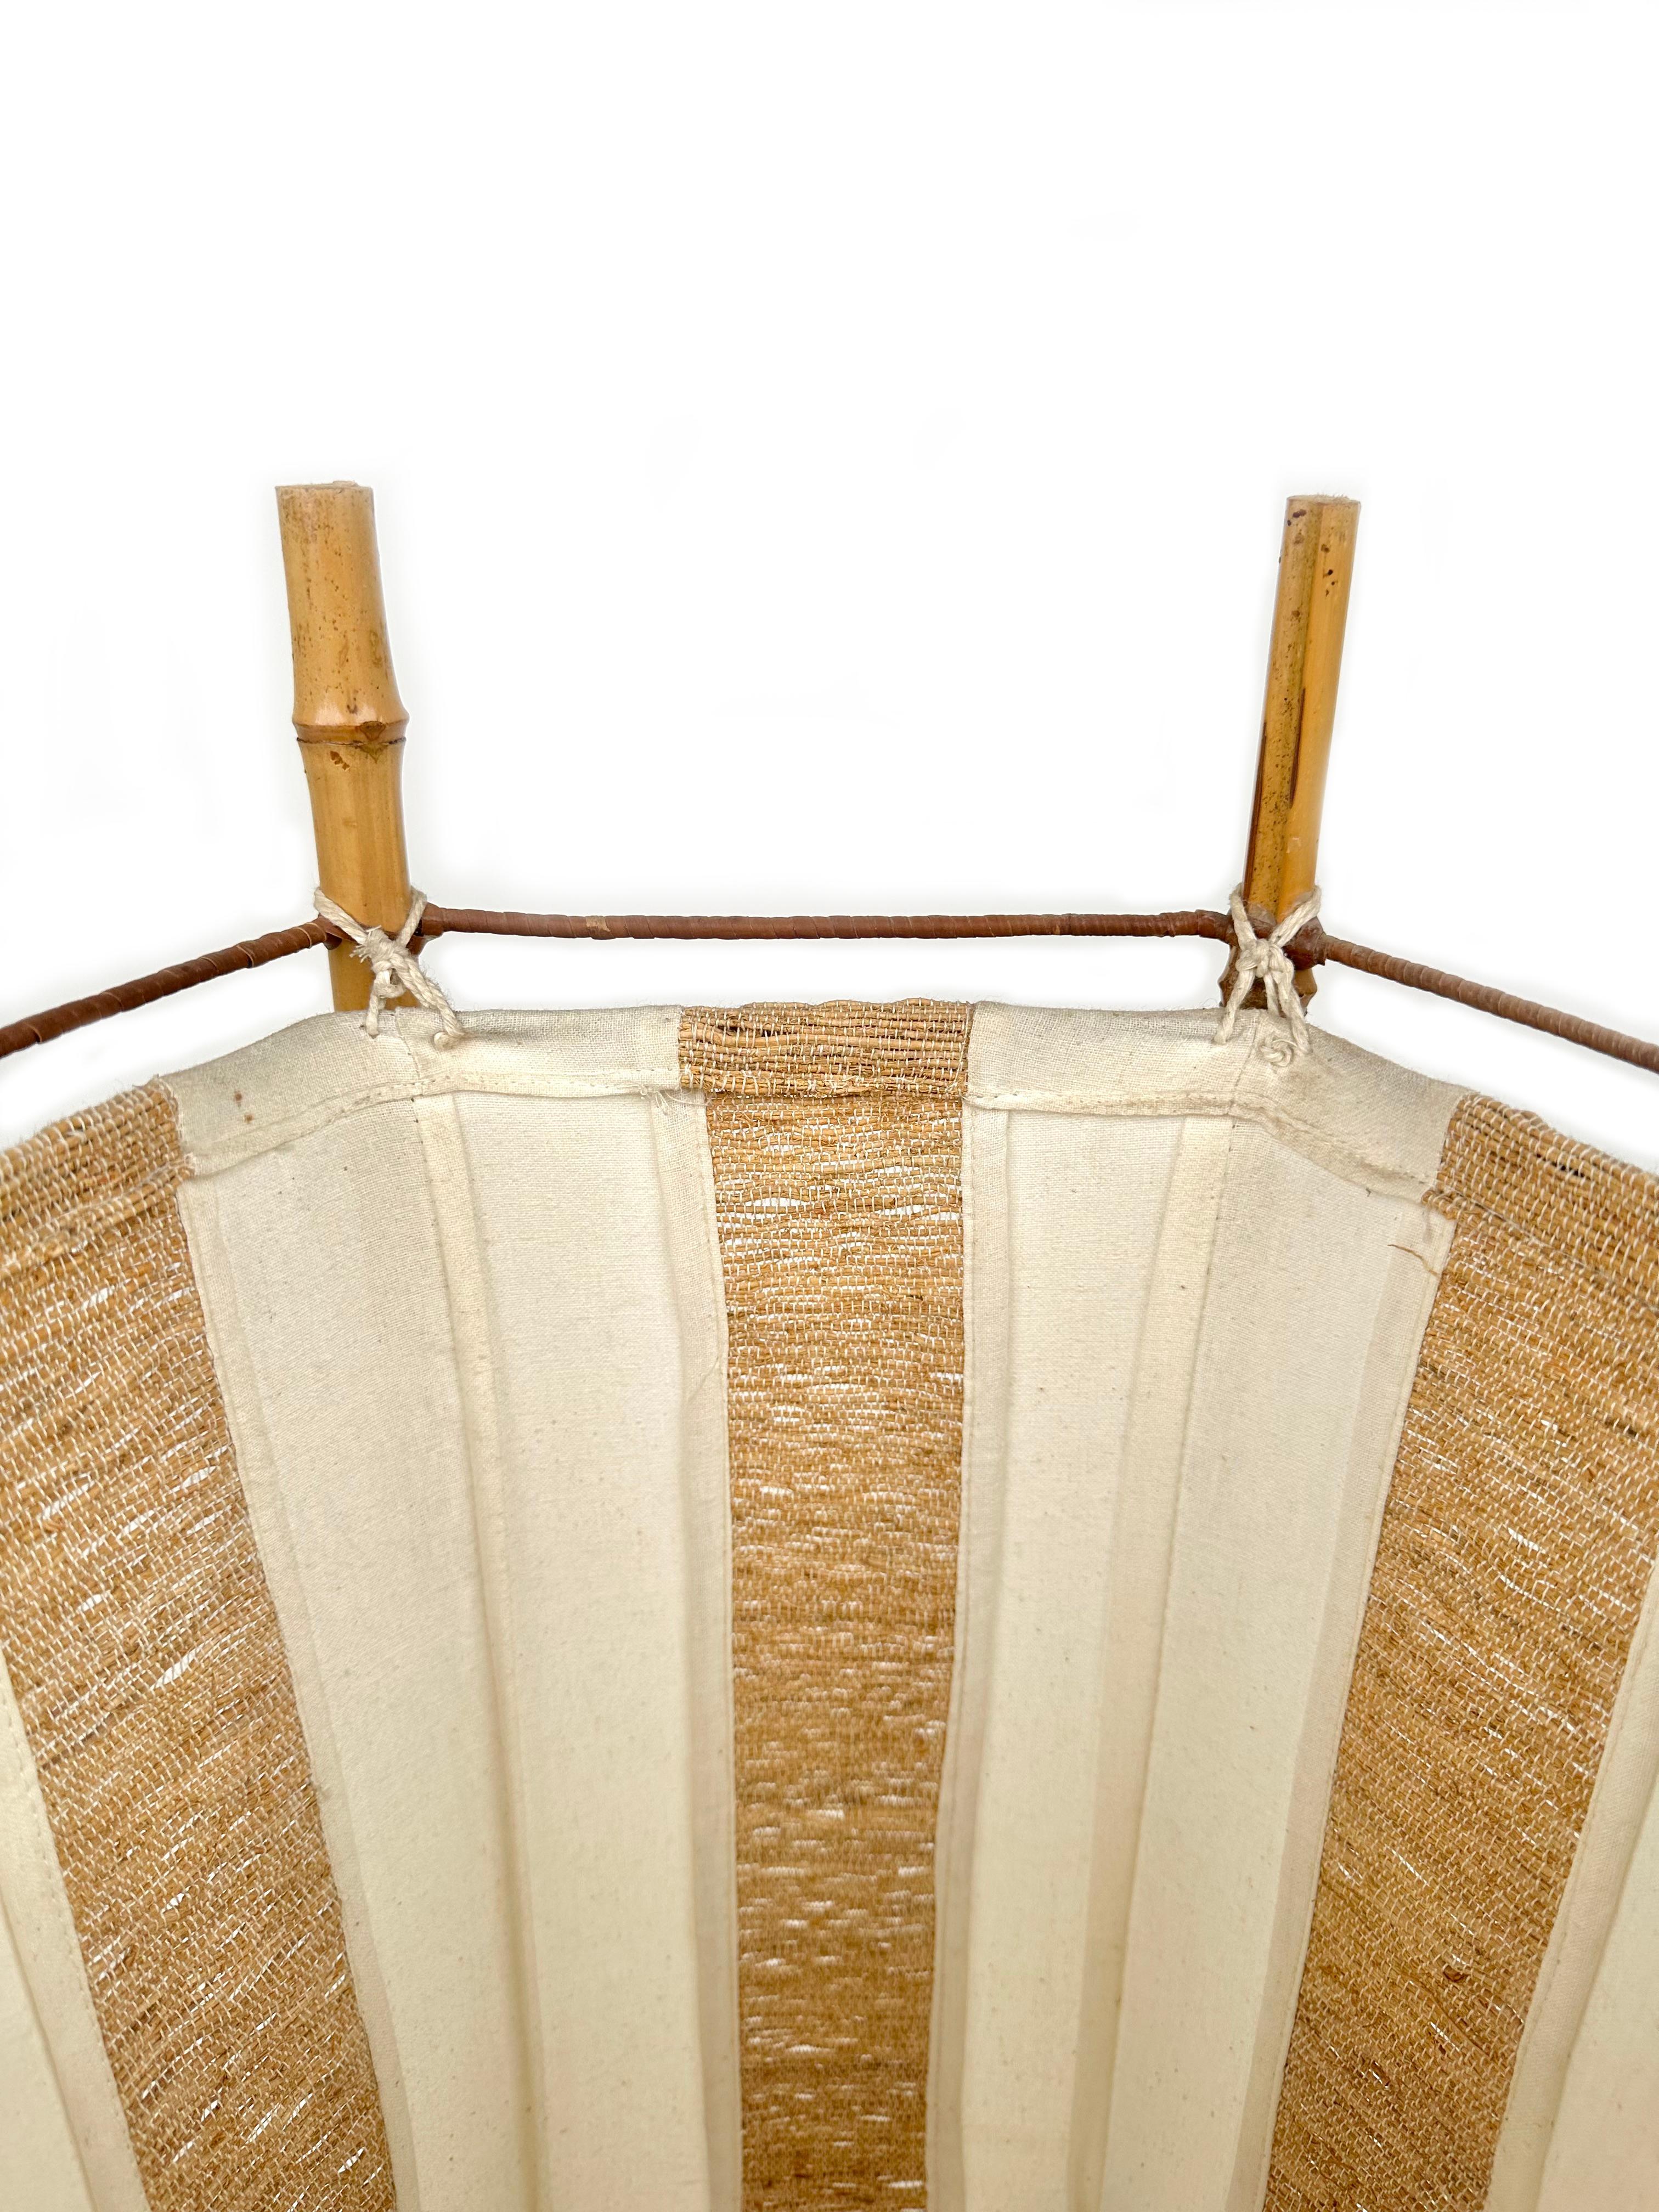 Bamboo, Rattan and Cotton Table or Floor Lamp Louis Sognot style, Italy 1960s For Sale 7